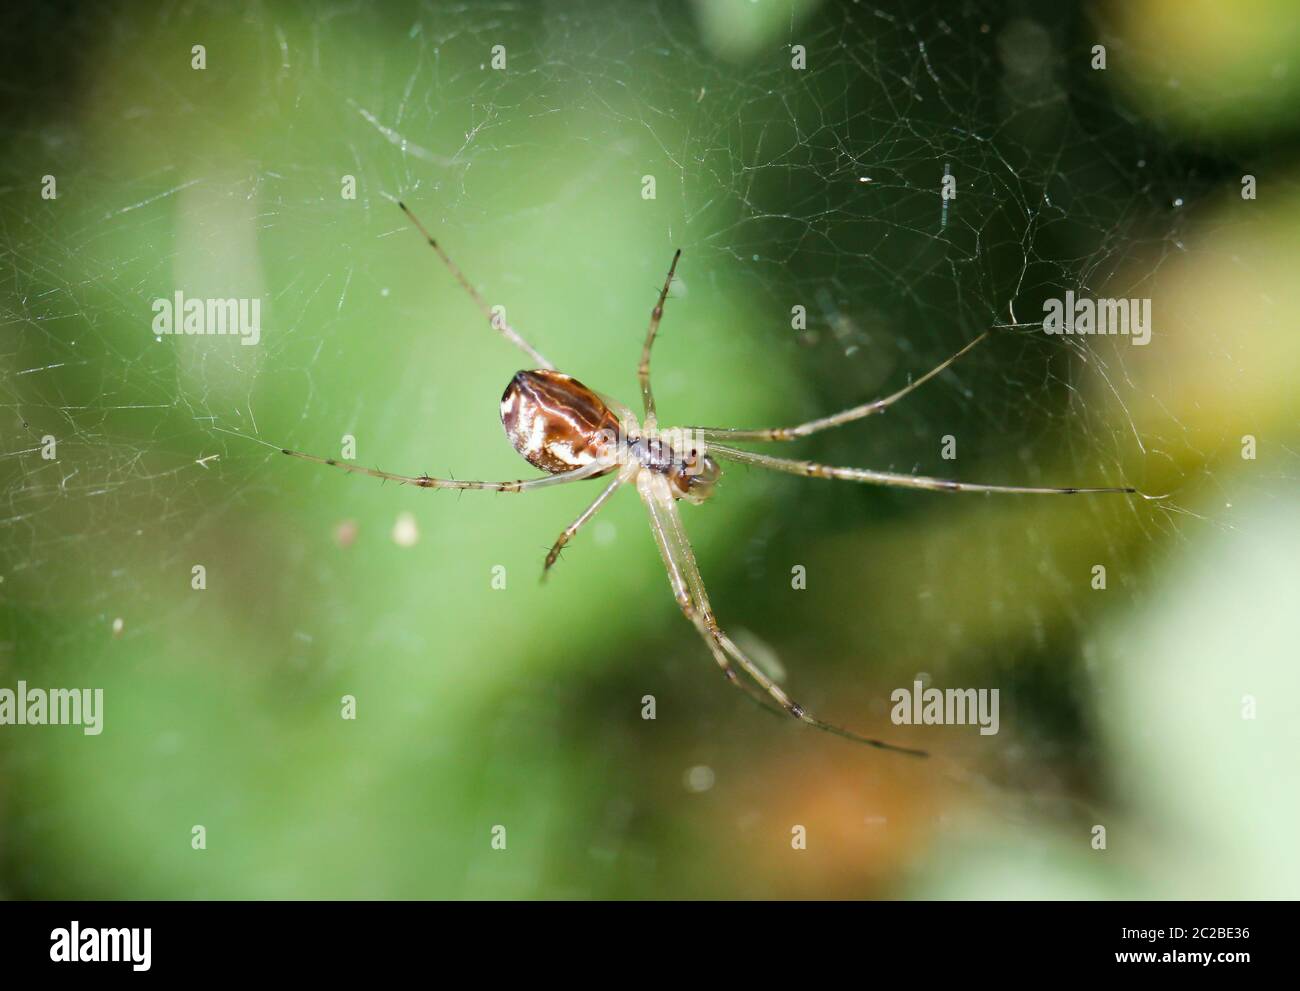 Details of a spider, spider on a plant, spider in the web Stock Photo